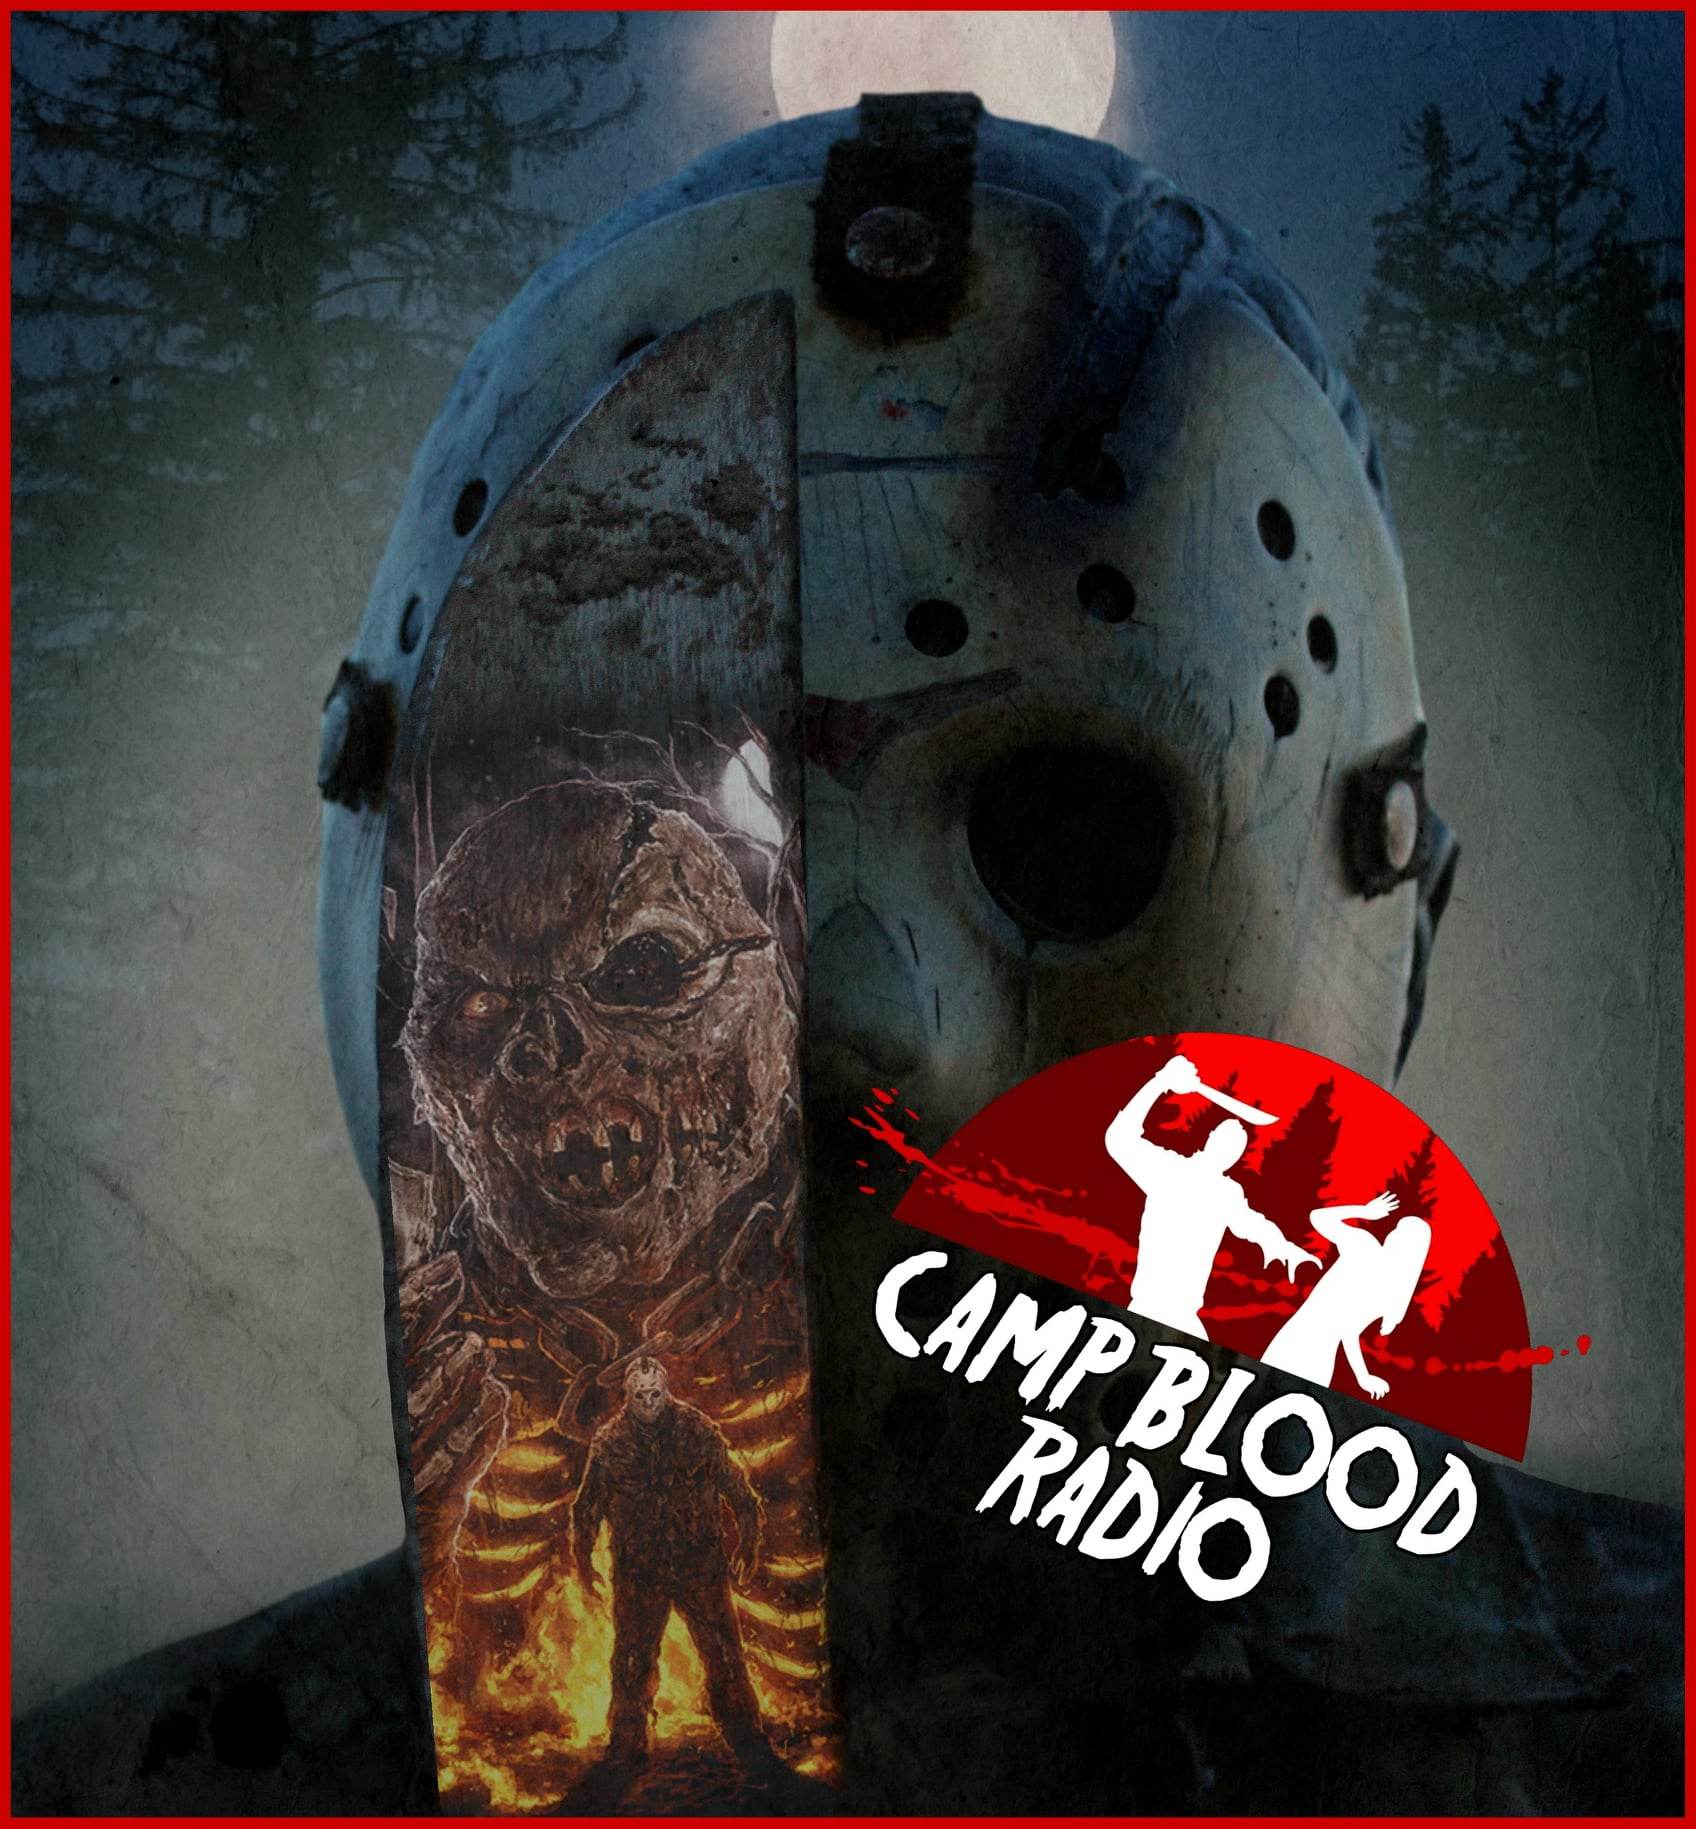 Friday the 13th All Access Special